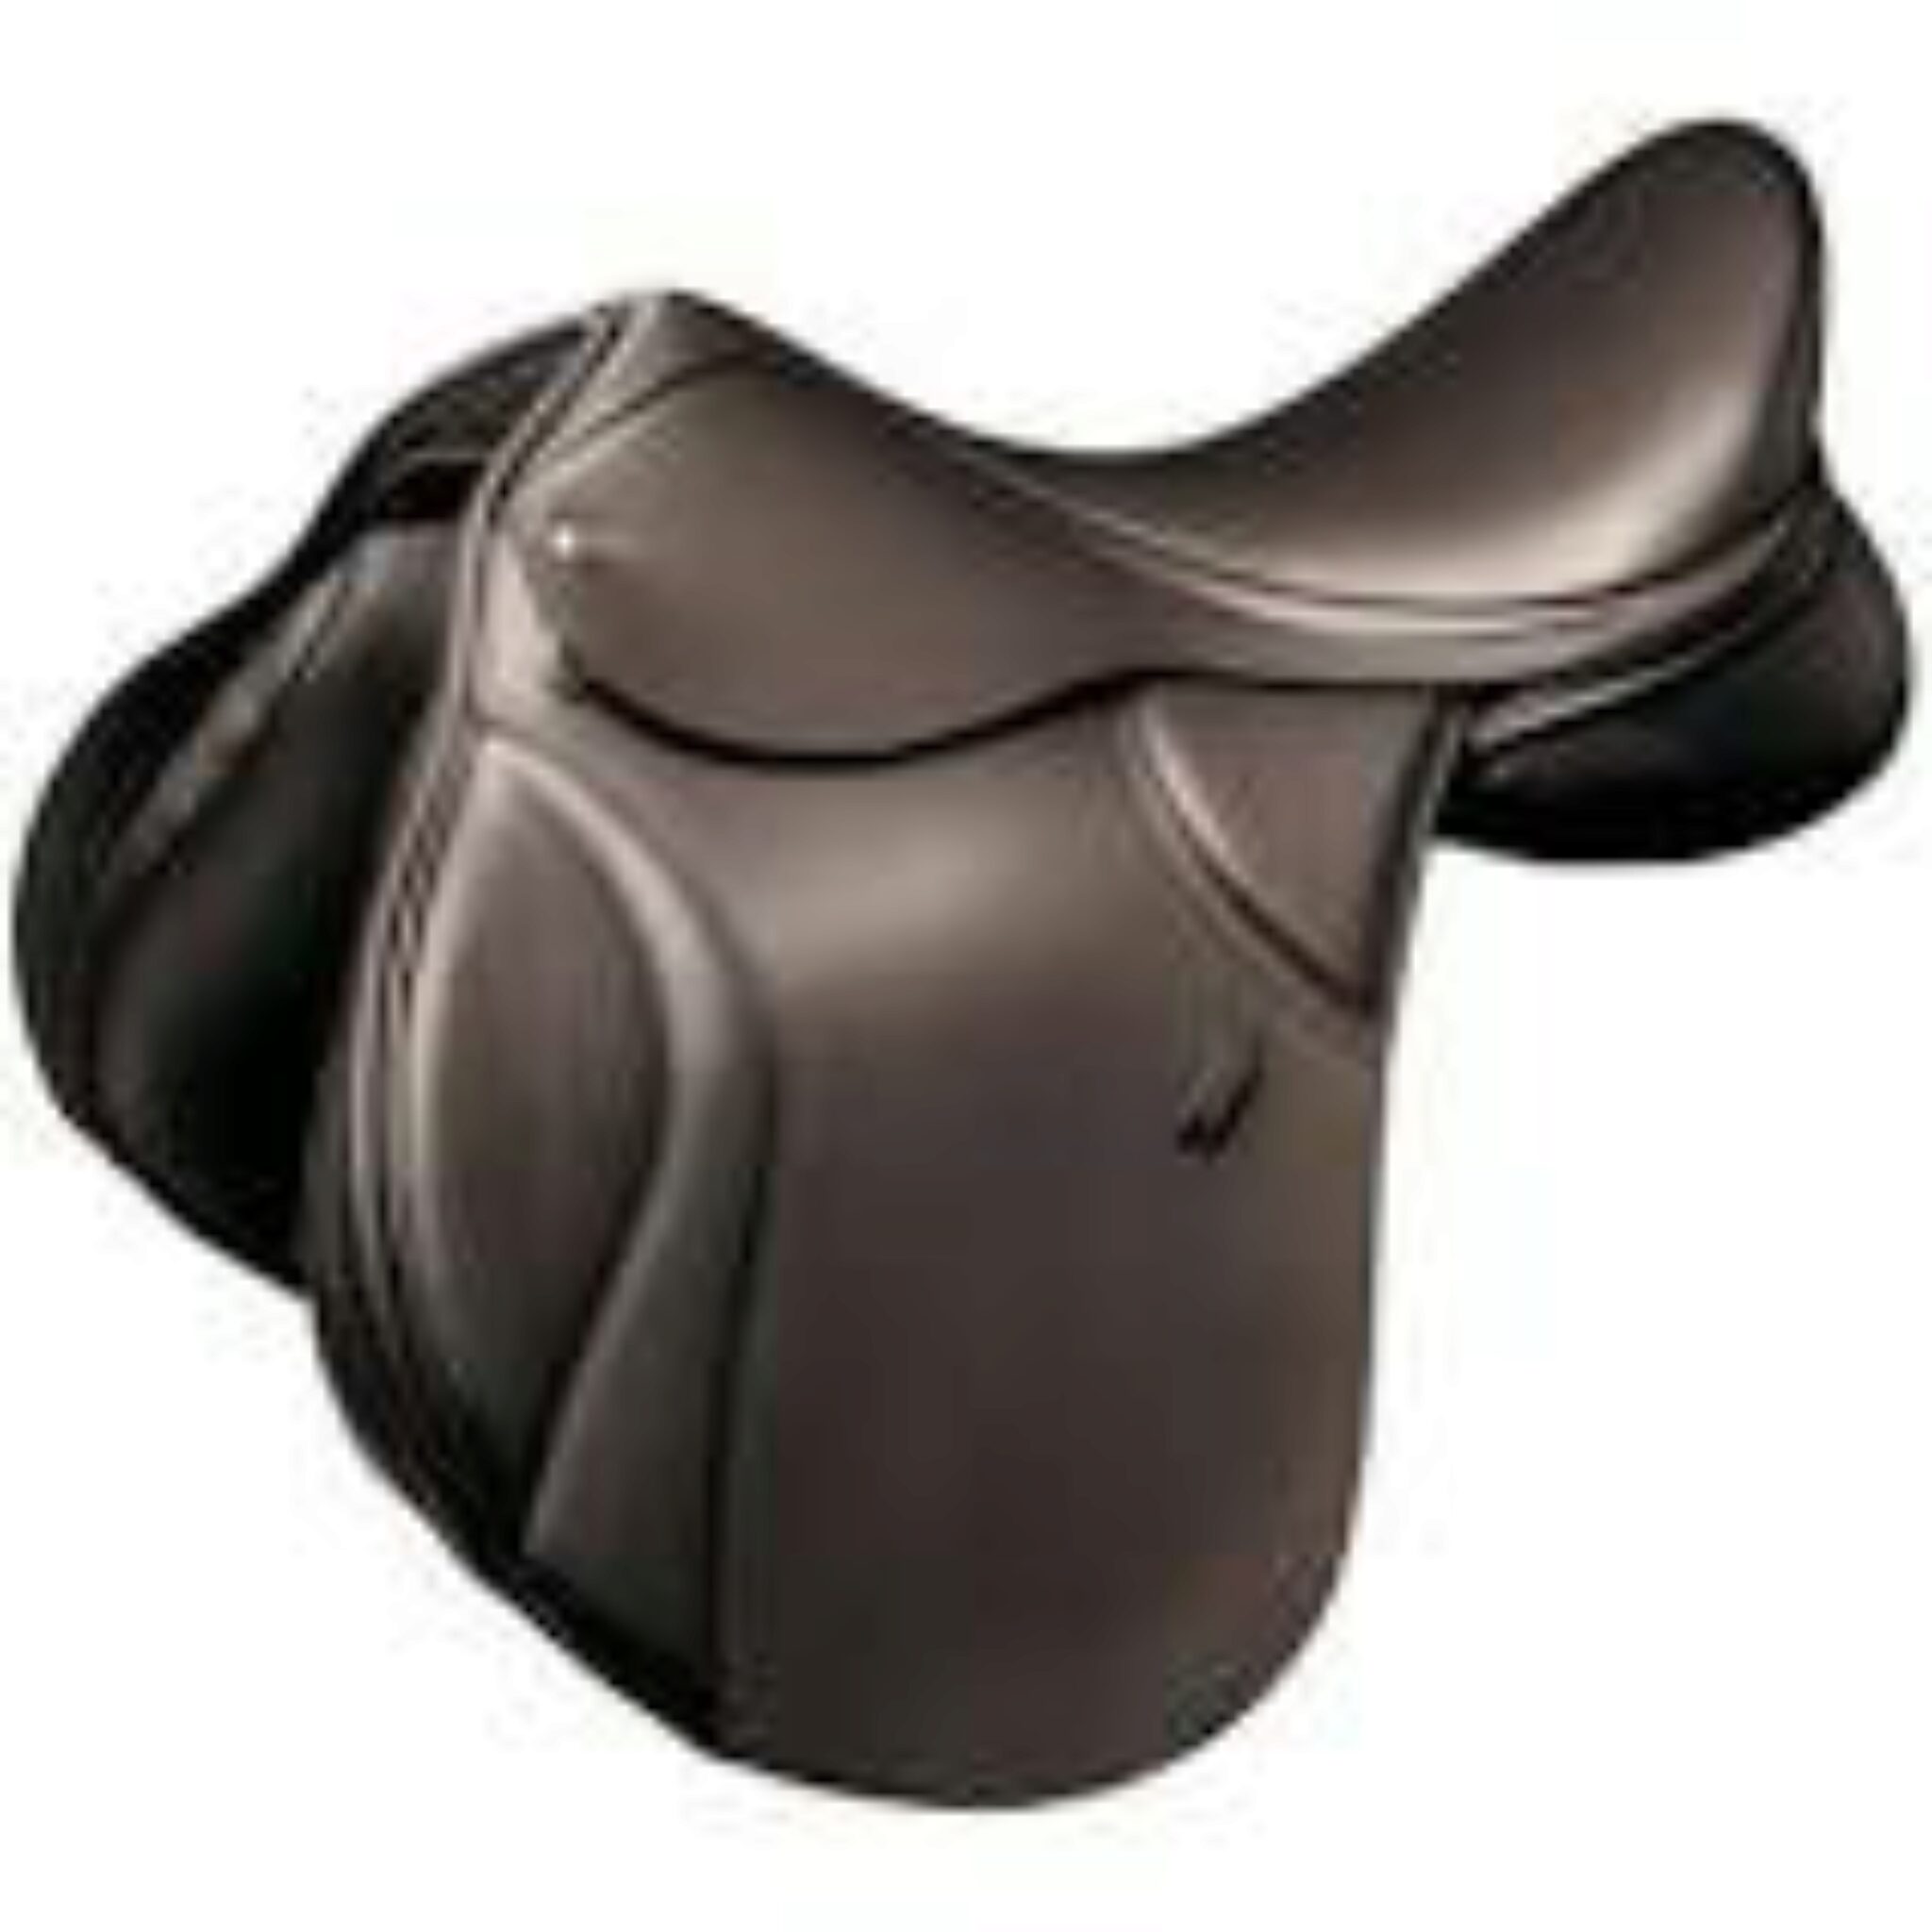 Thorowgood Griffin Saddle Review - Goed Of Slecht?